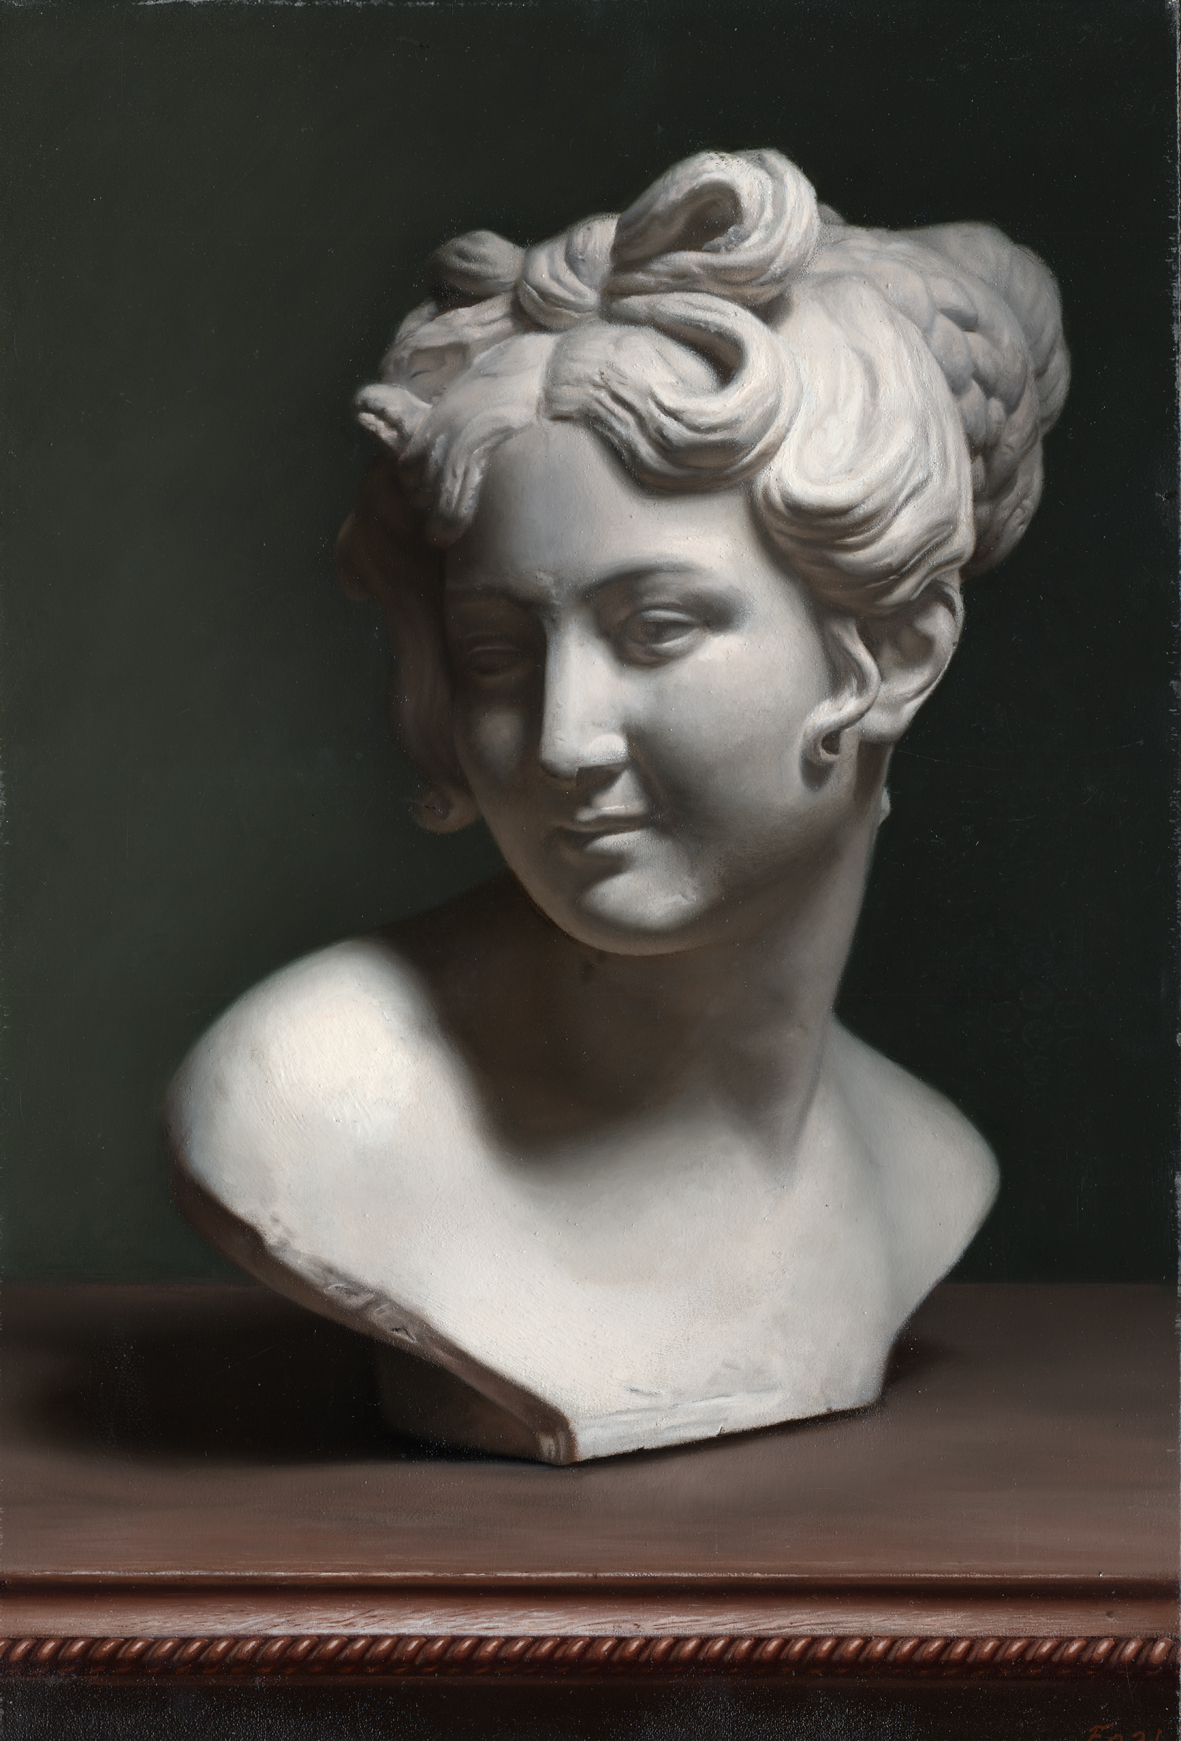 Painting and bust photo